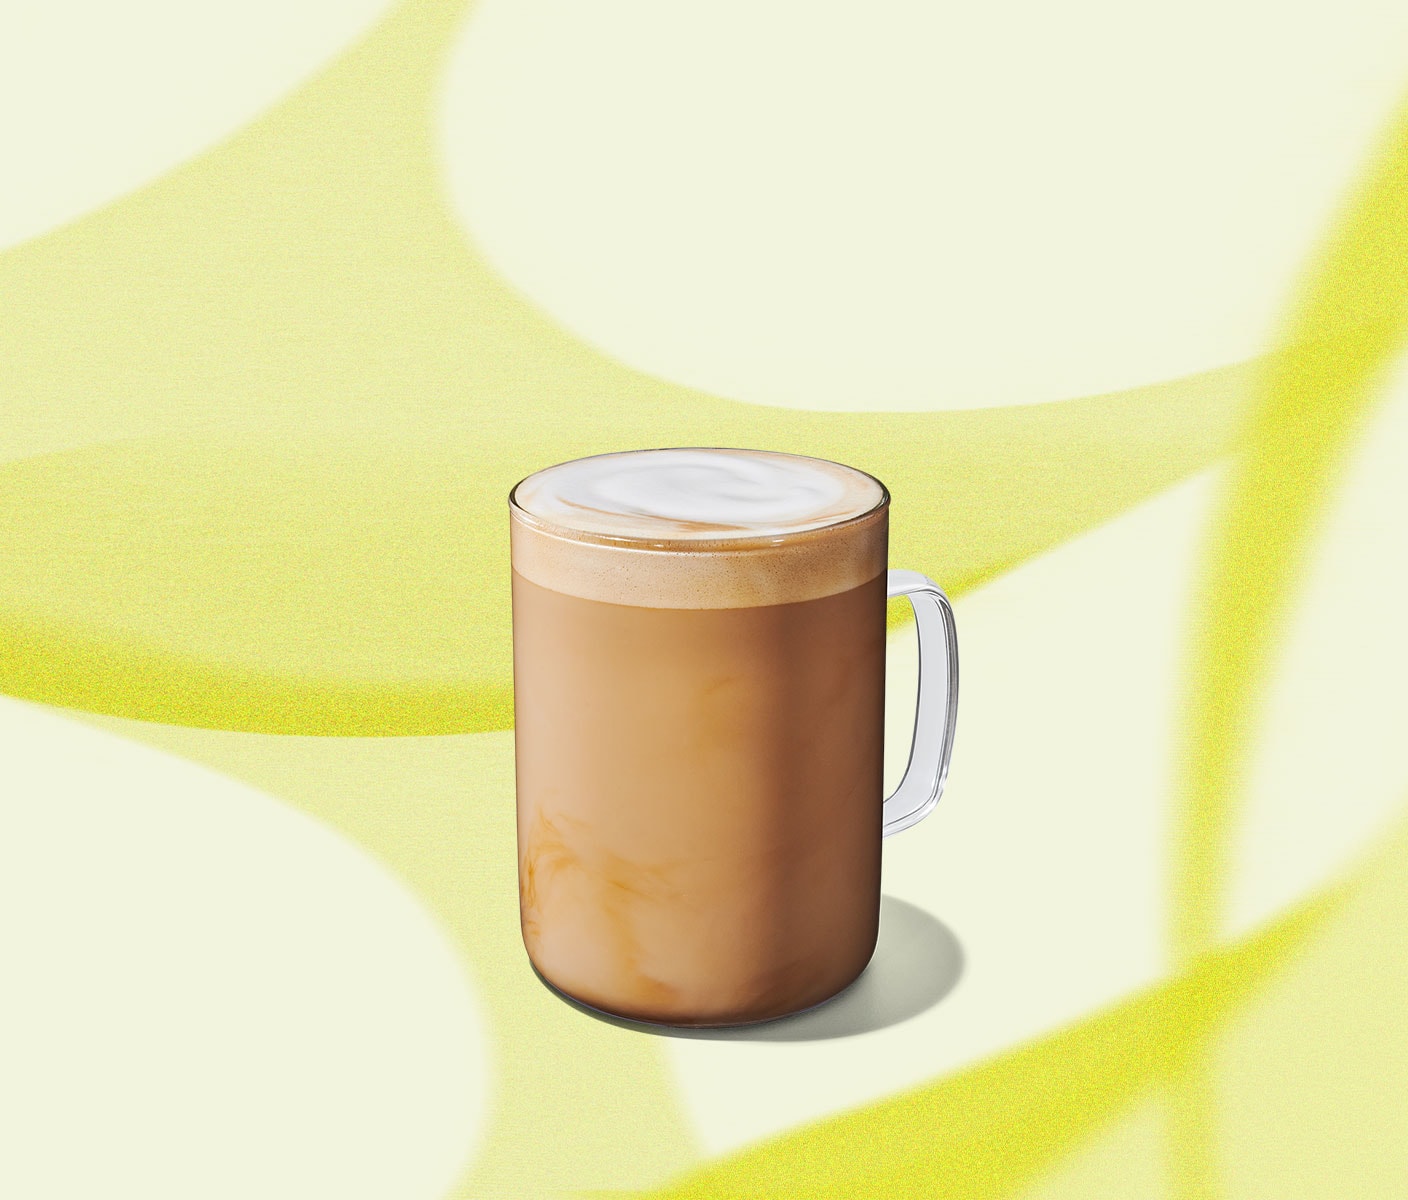 A creamy coffee drink in a clear glass mug with a handle.